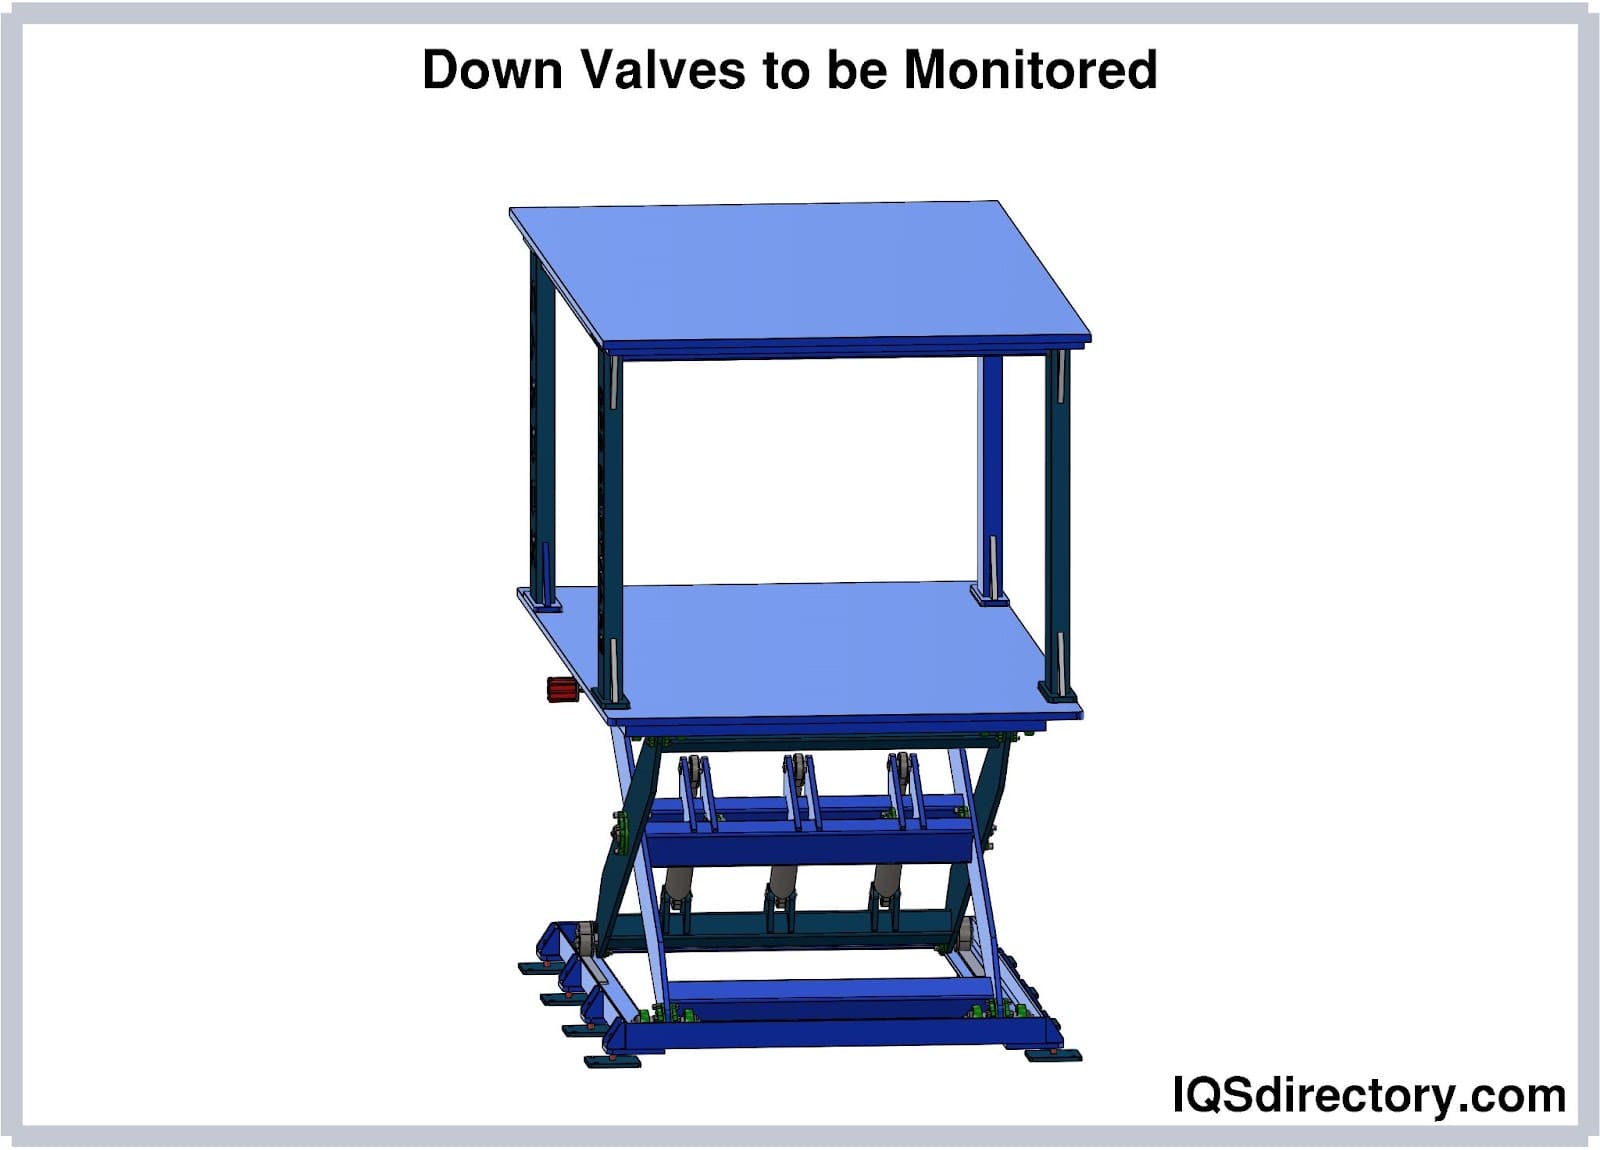 Down Valves to be Monitored